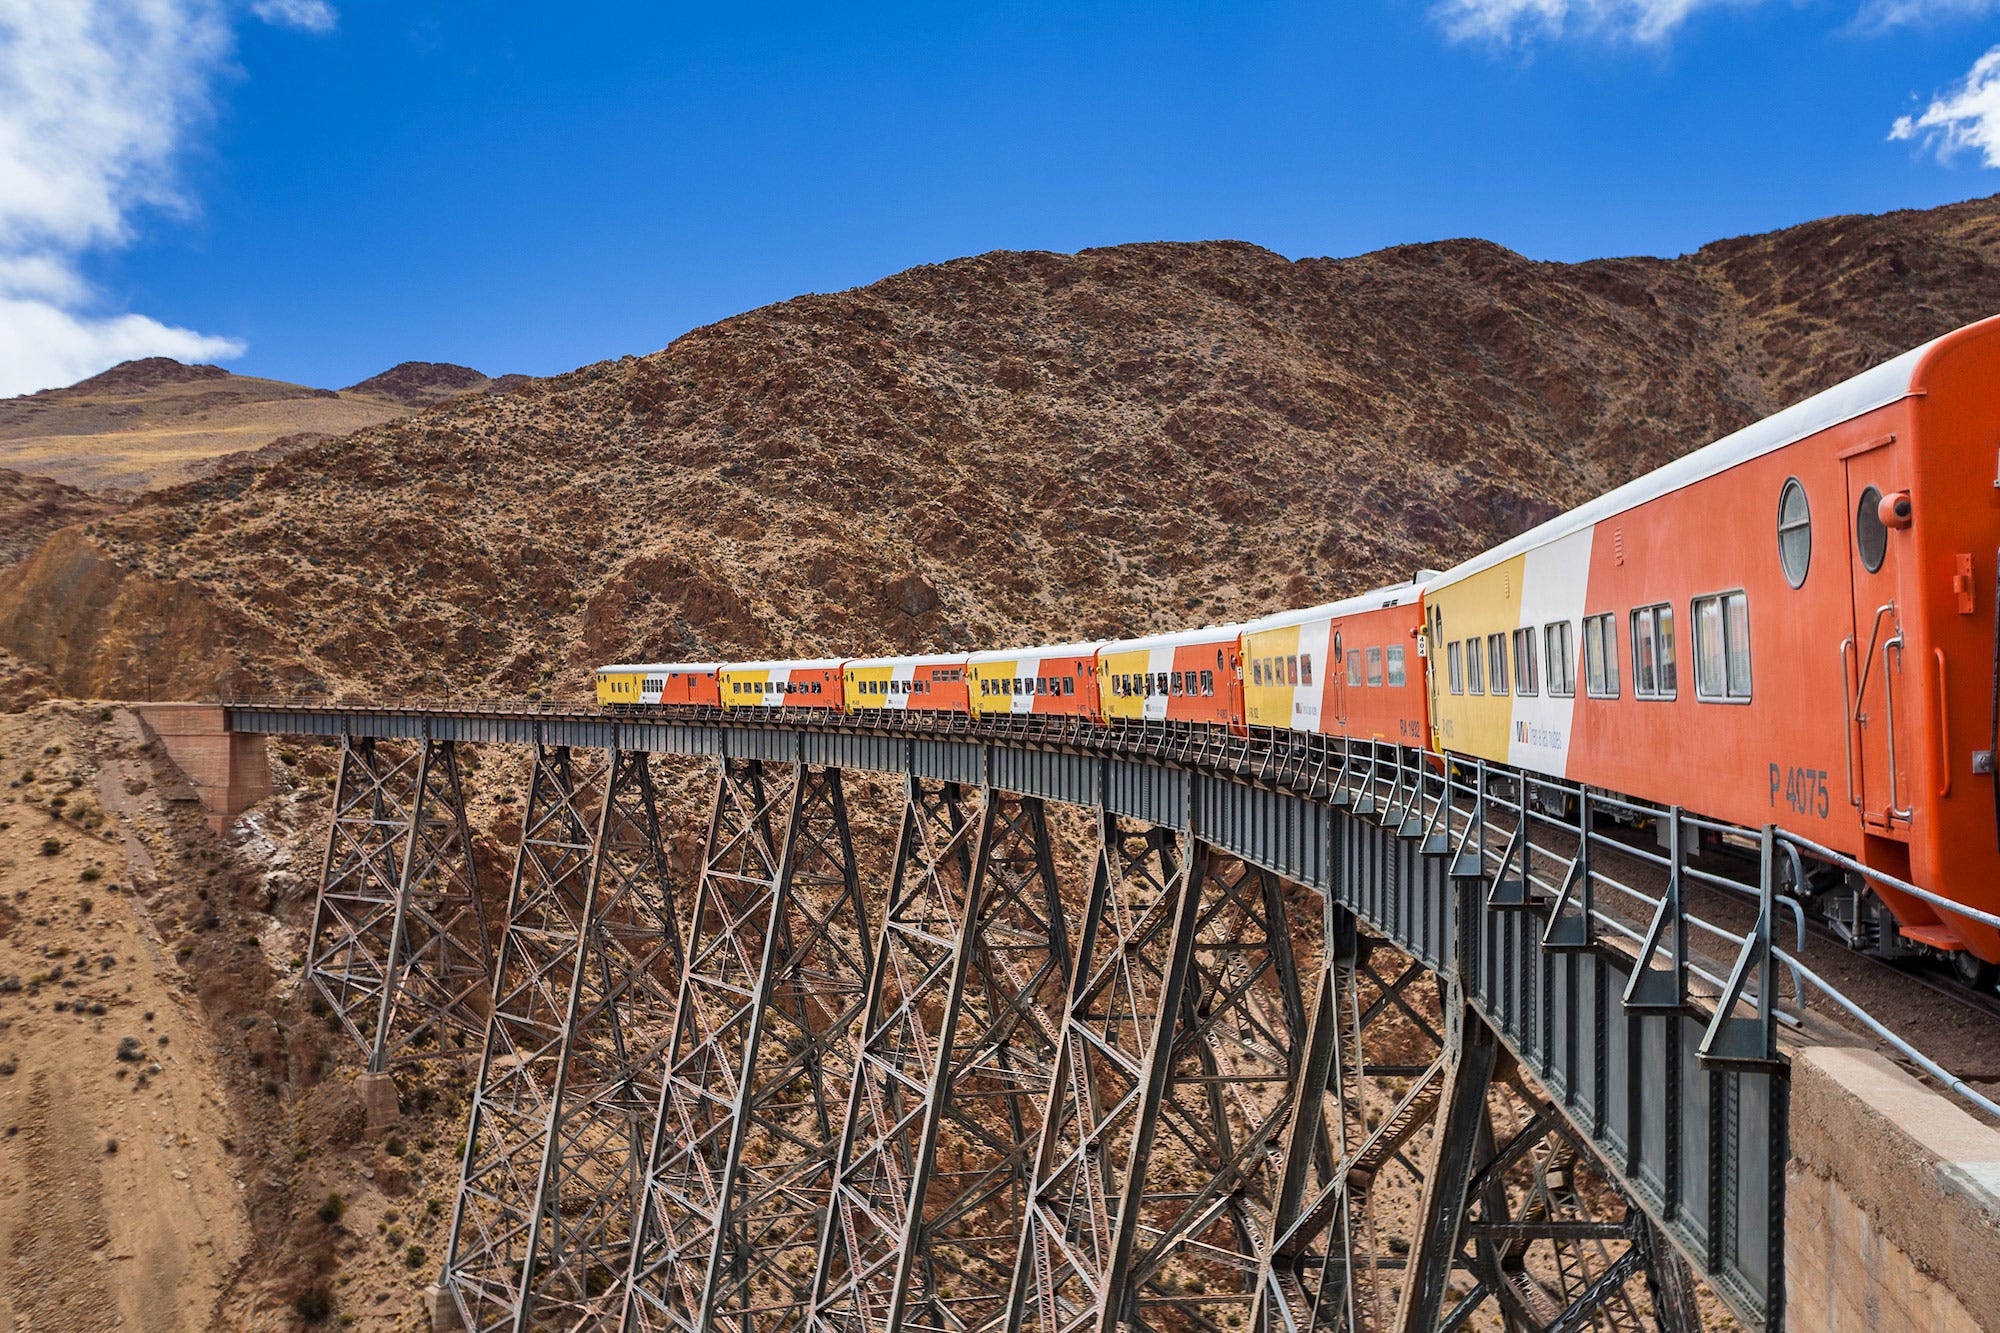 <p><strong>Country</strong>: Argentina</p><p><strong>Duration of trip</strong>: 15 hours</p><p><strong>Description: </strong>The "Tren a las Nubes" follows zig-zag tracks across the rugged Andes on its way from Salta, Argentina, to the Chilean border. It's one of the highest train rides in the world. Read more <a href="https://www.insider.com/taking-train-to-the-clouds-what-its-like-tren-las-nubes-argentina">about what the journey is actually like here</a>. </p><p><strong>Cost: </strong>Approximately $84</p><p><em>Source: <a href="https://trenalasnubes.com.ar/inicio-en/" rel="nofollow noopener">Train to the Clouds</a></em></p>